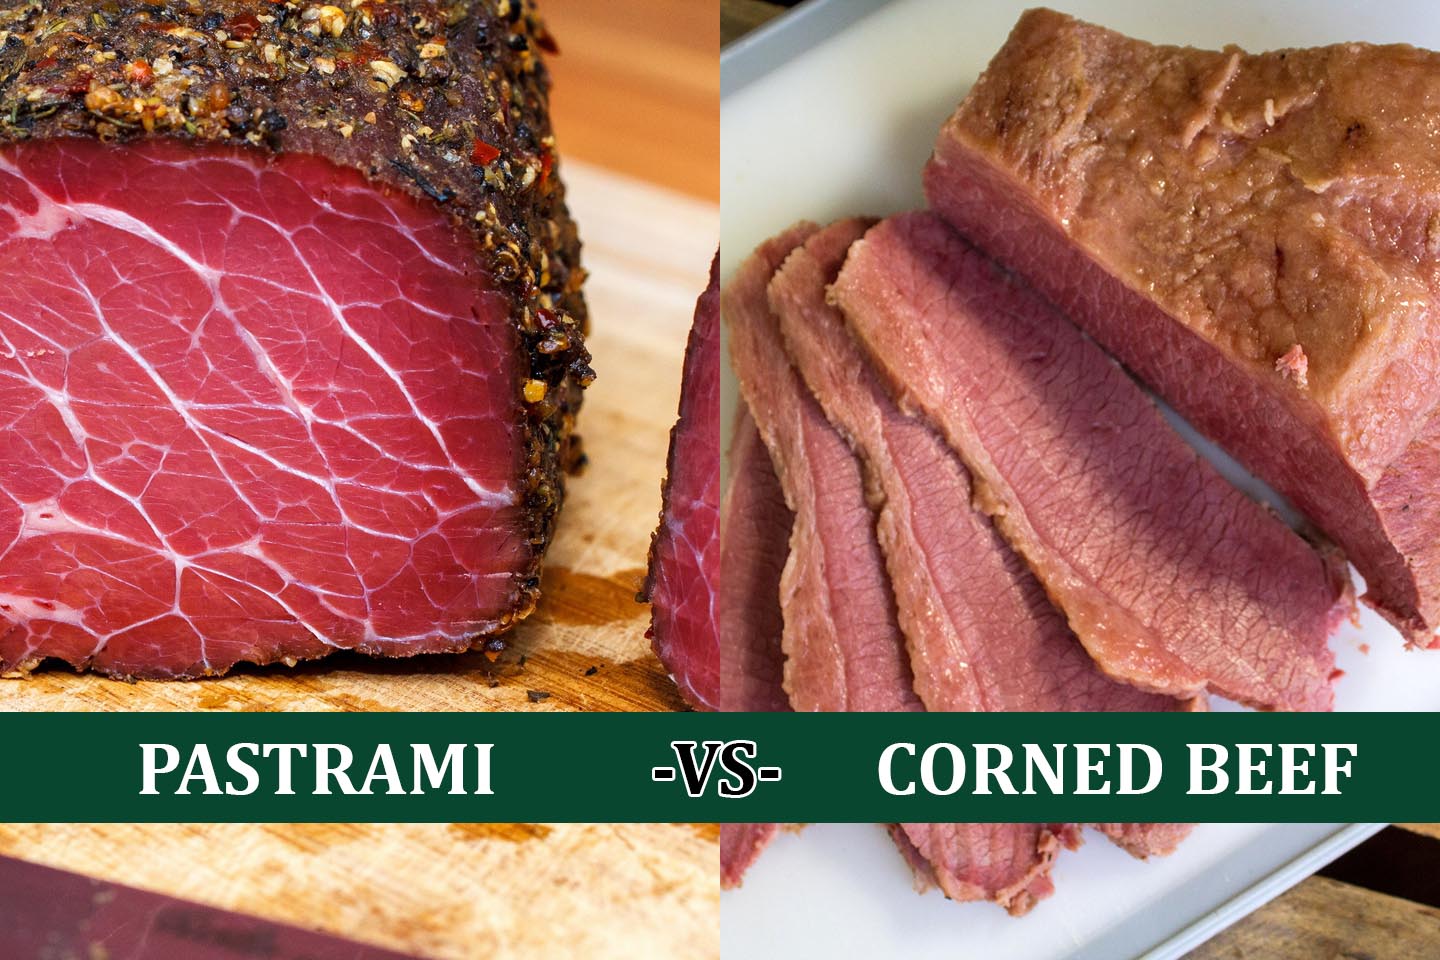 Spam Vs Corned Beef: What's The Difference?